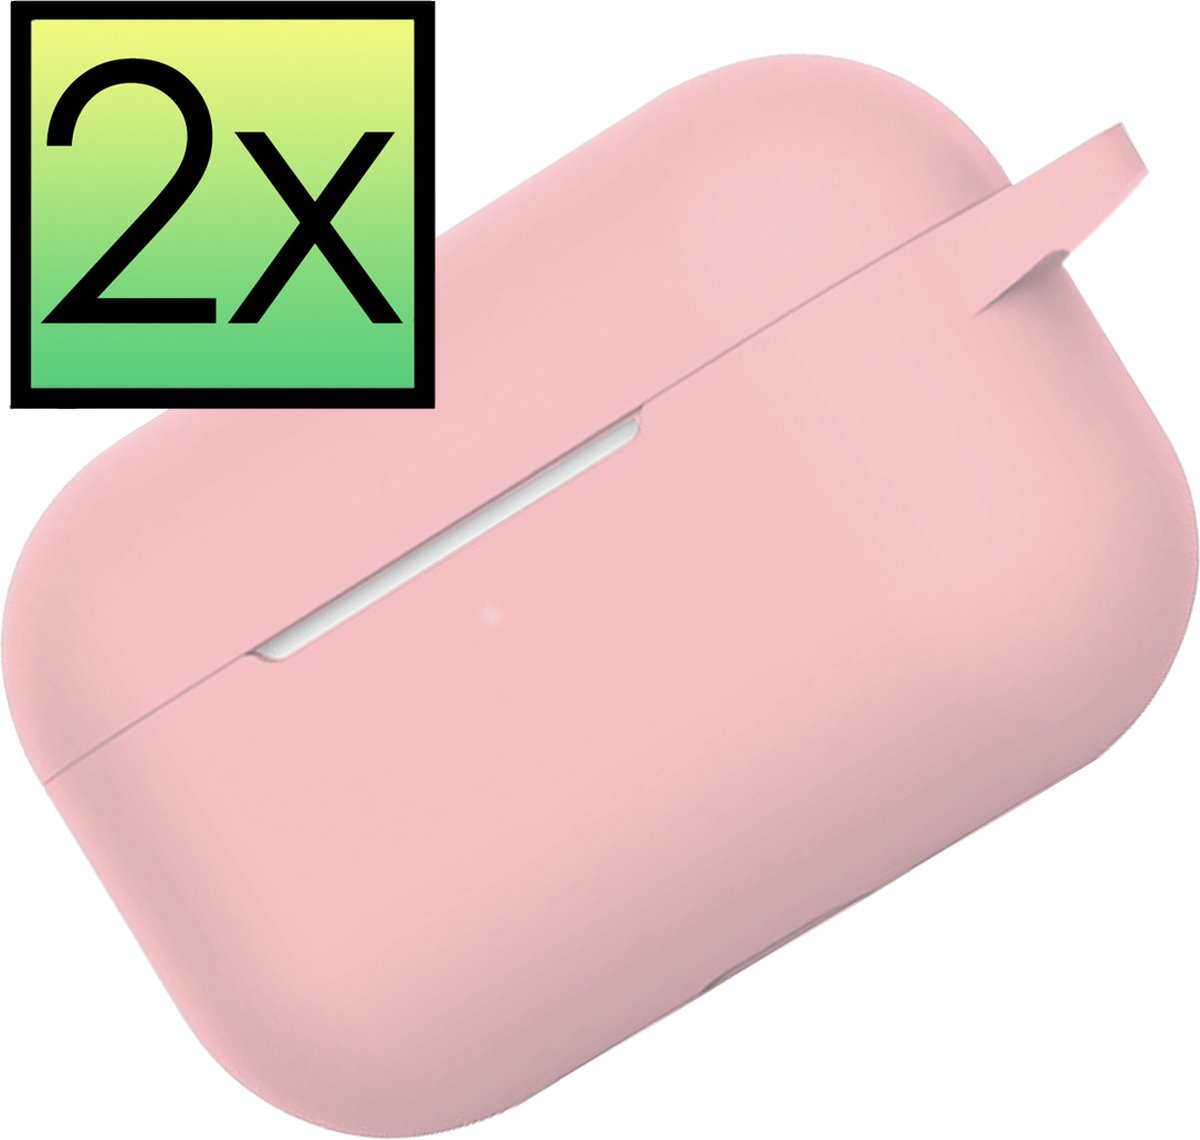 Hoes Geschikt voor Airpods Pro Hoesje Cover Silicone Case Hoes - 2x - Lichtroze